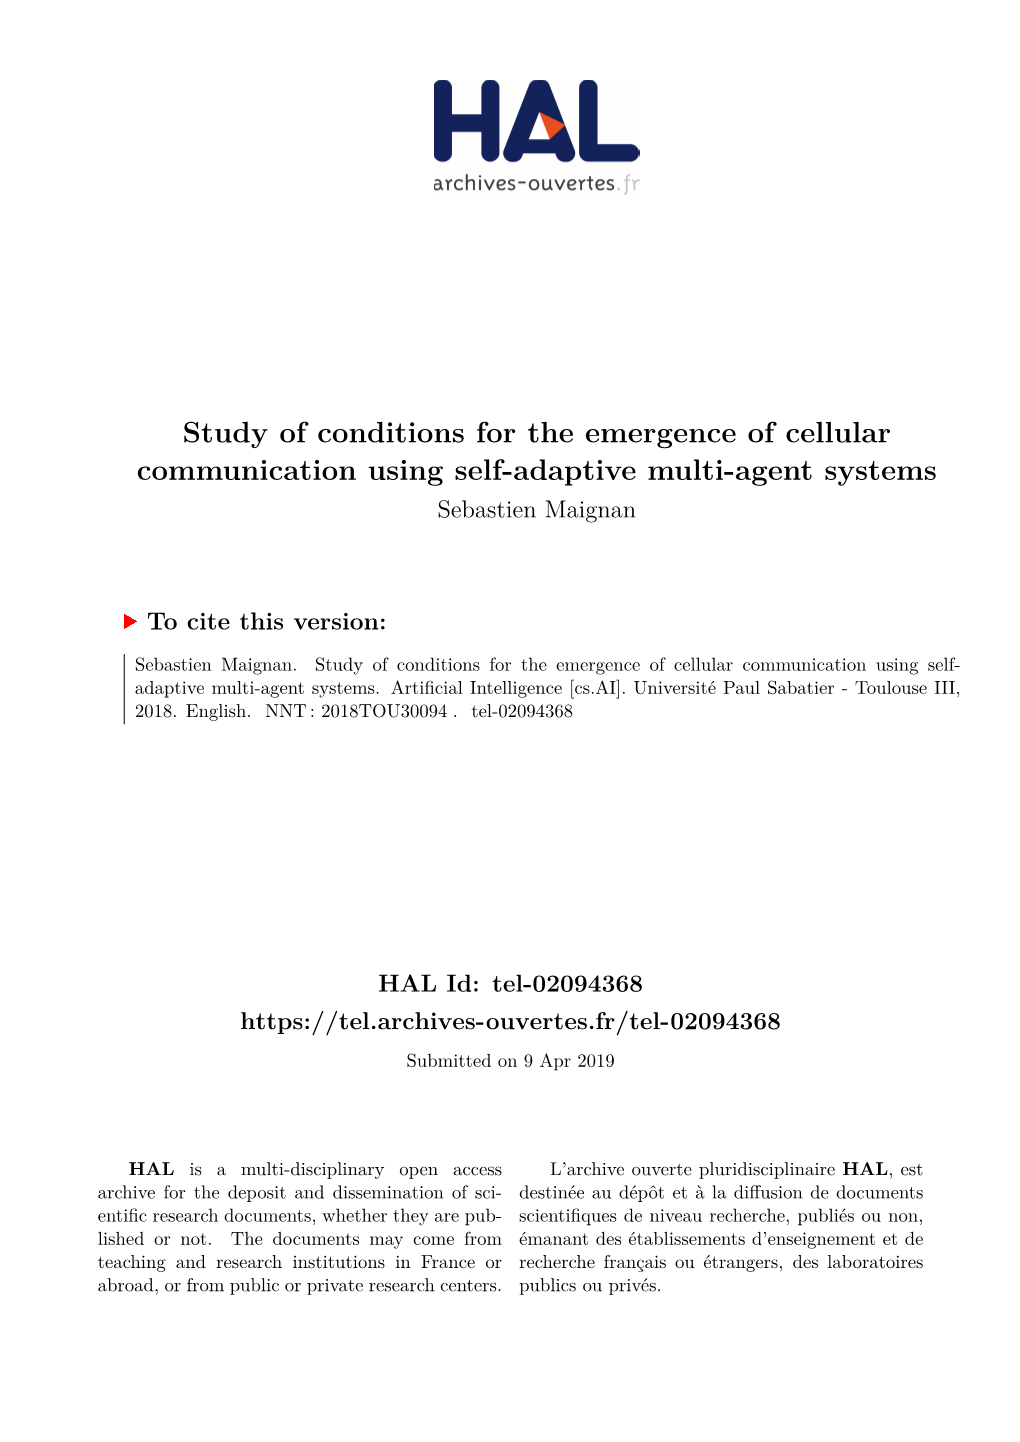 Study of Conditions for the Emergence of Cellular Communication Using Self-Adaptive Multi-Agent Systems Sebastien Maignan